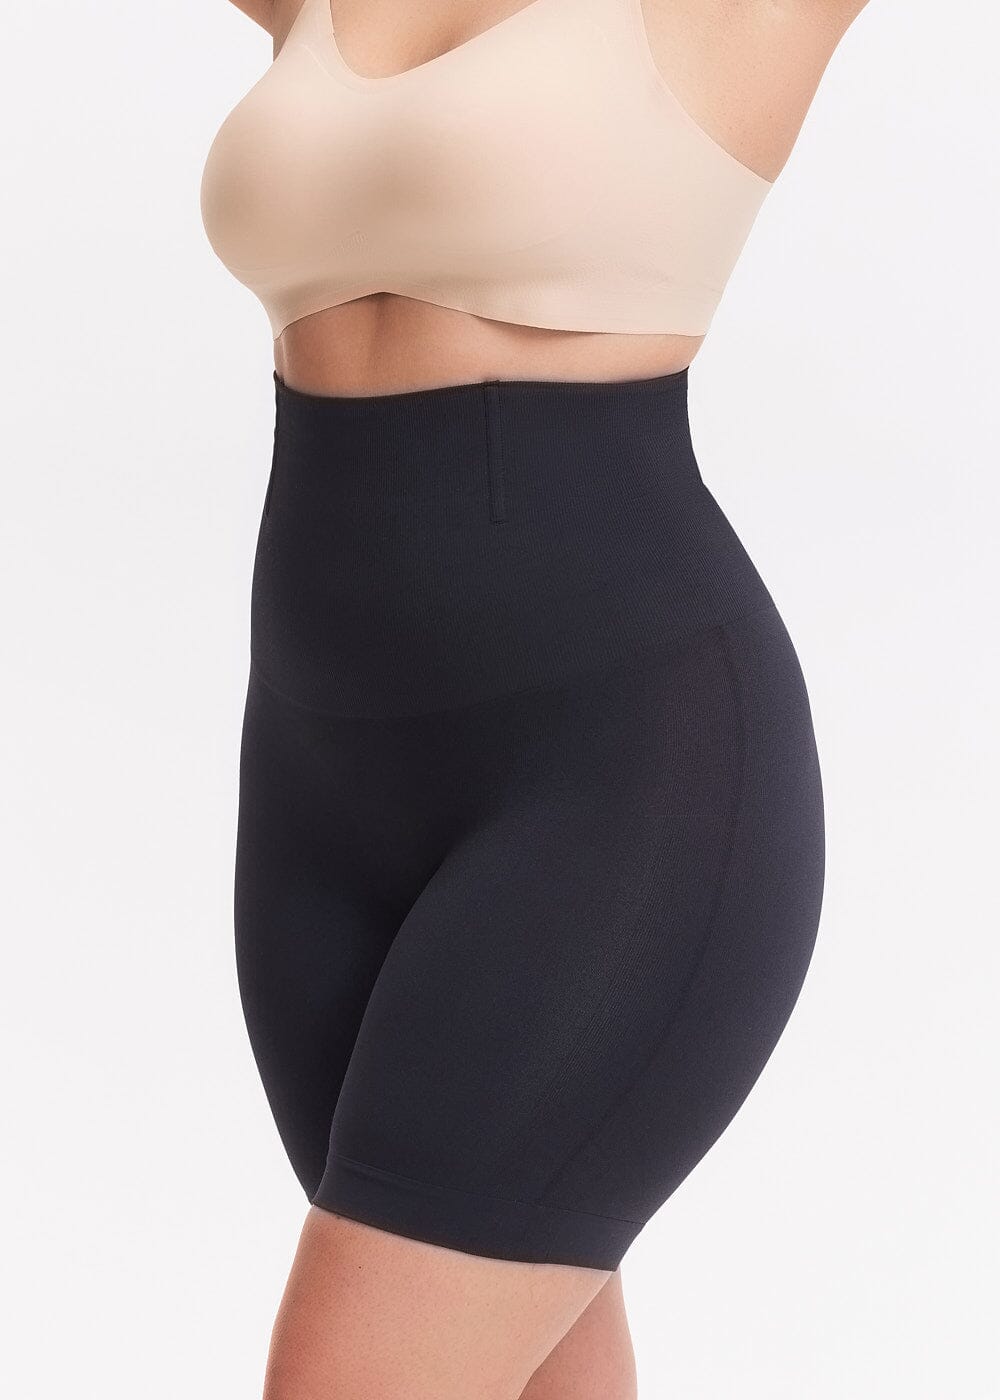  Shapewear For Women Tummy Control- High Waisted Shorts- Body  Shaper For Women- Small To Plus Sizes Coffee